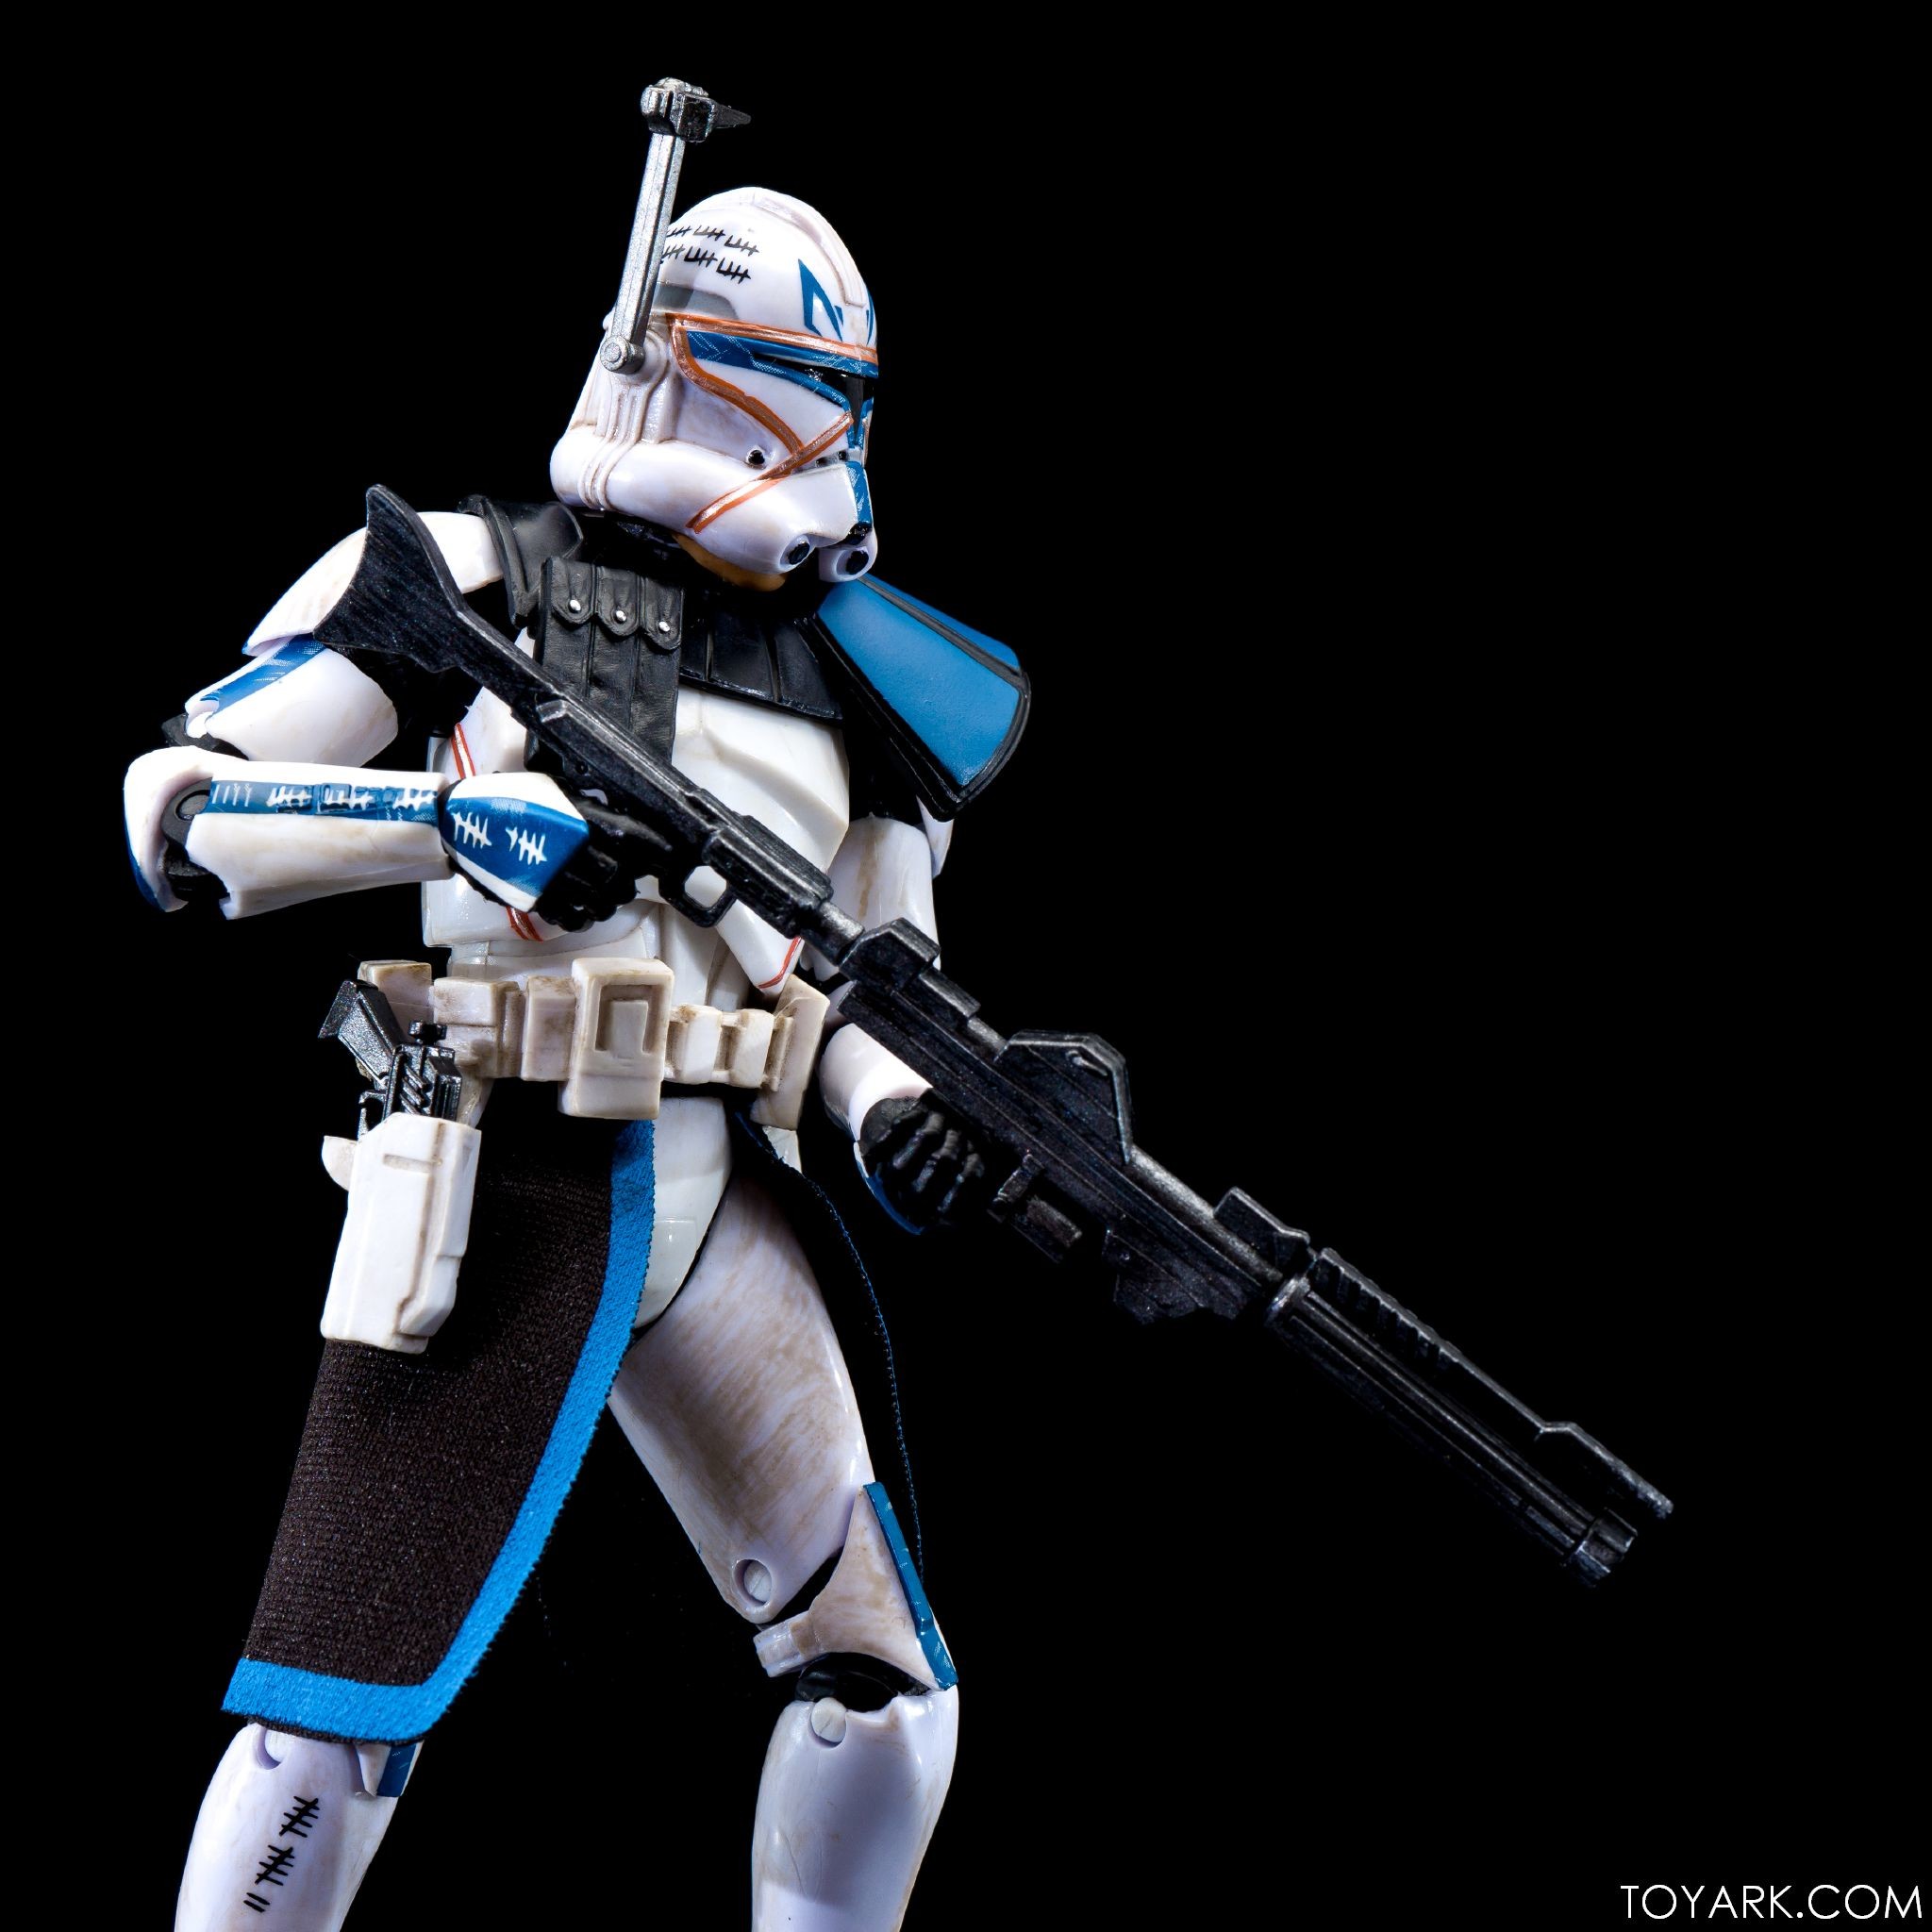 captain rex wallpaper,action figure,toy,figurine,fictional character,animation